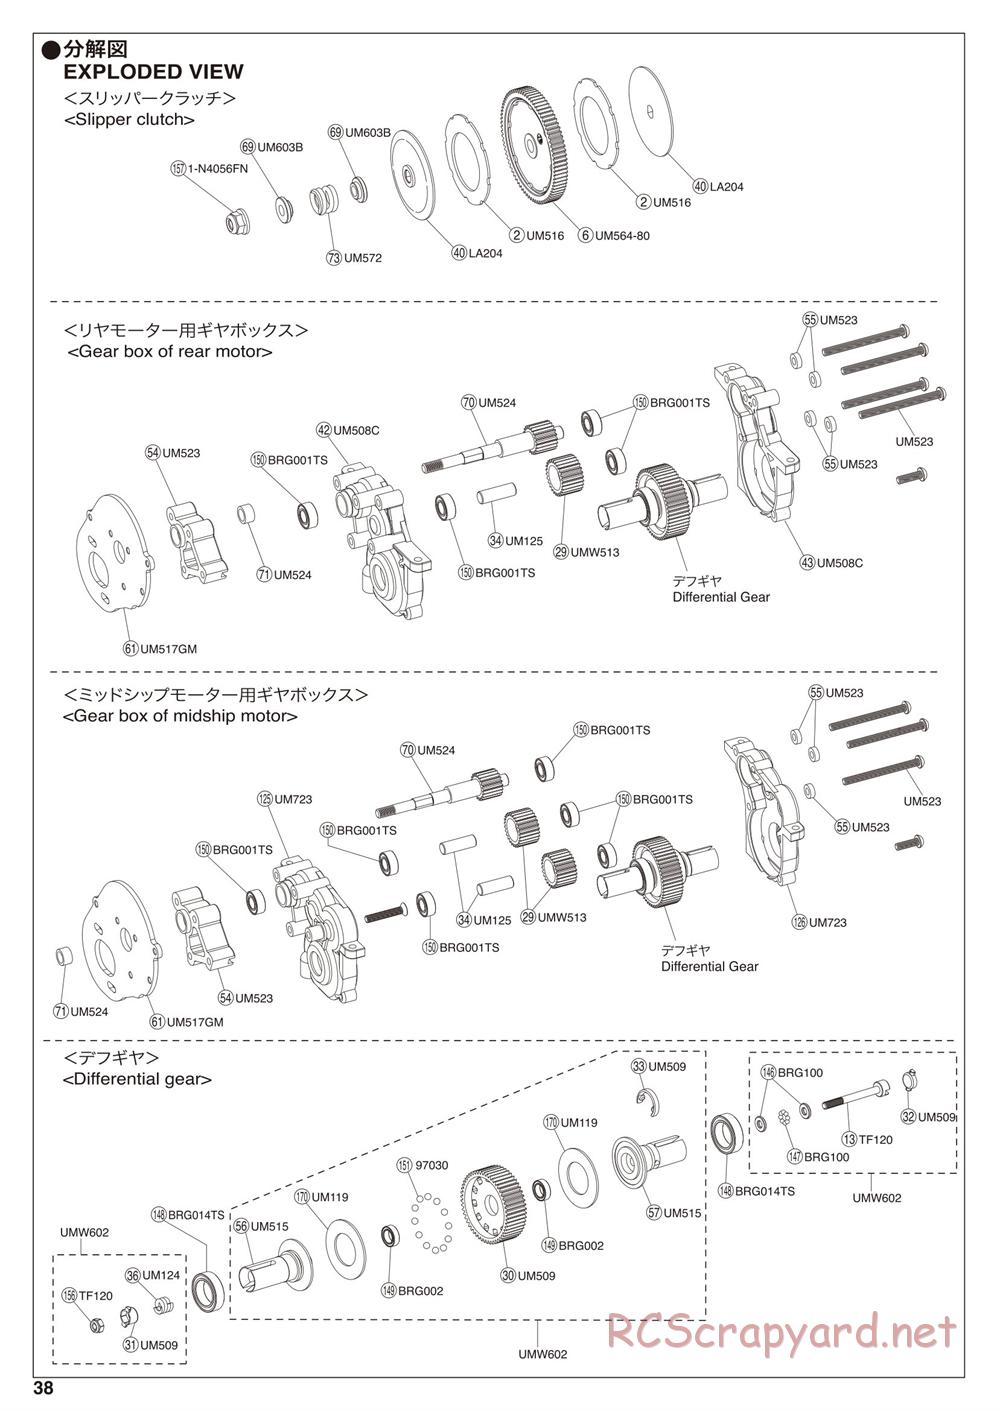 Kyosho - Ultima SC6 - Exploded Views - Page 2